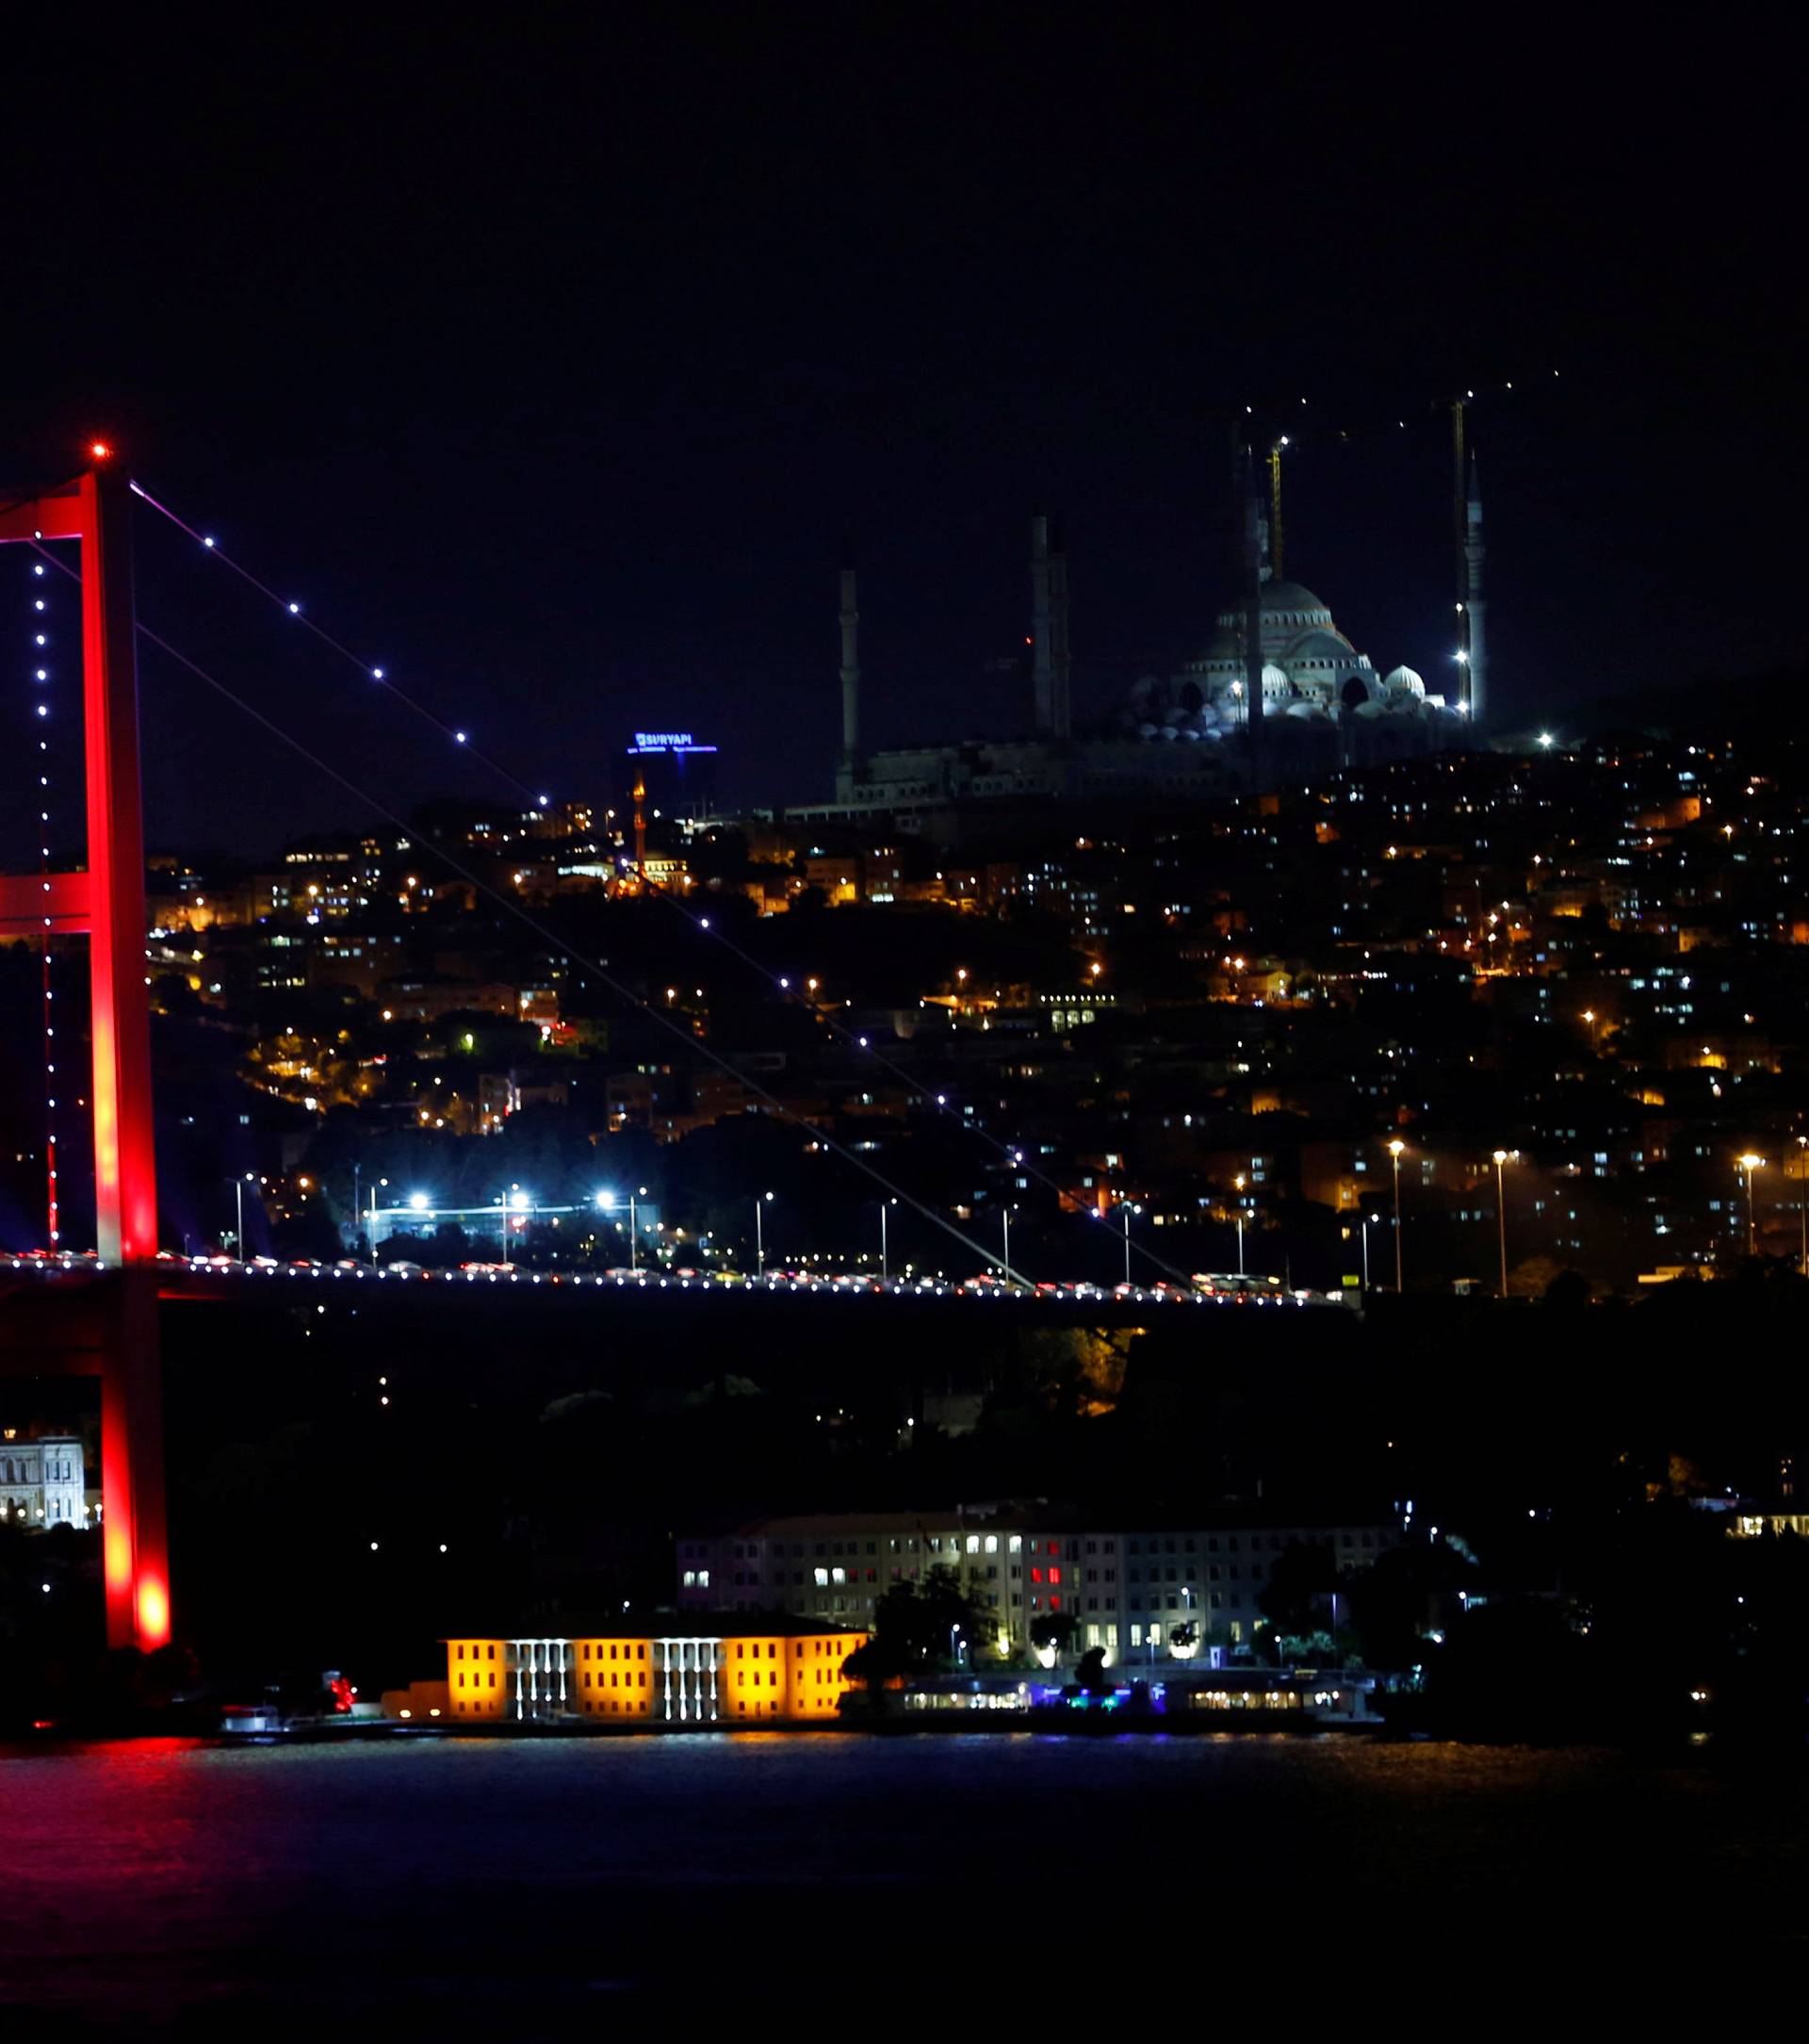 Bosphorus bridge, which links the city's European and Asian sides, is pictured in Istanbul